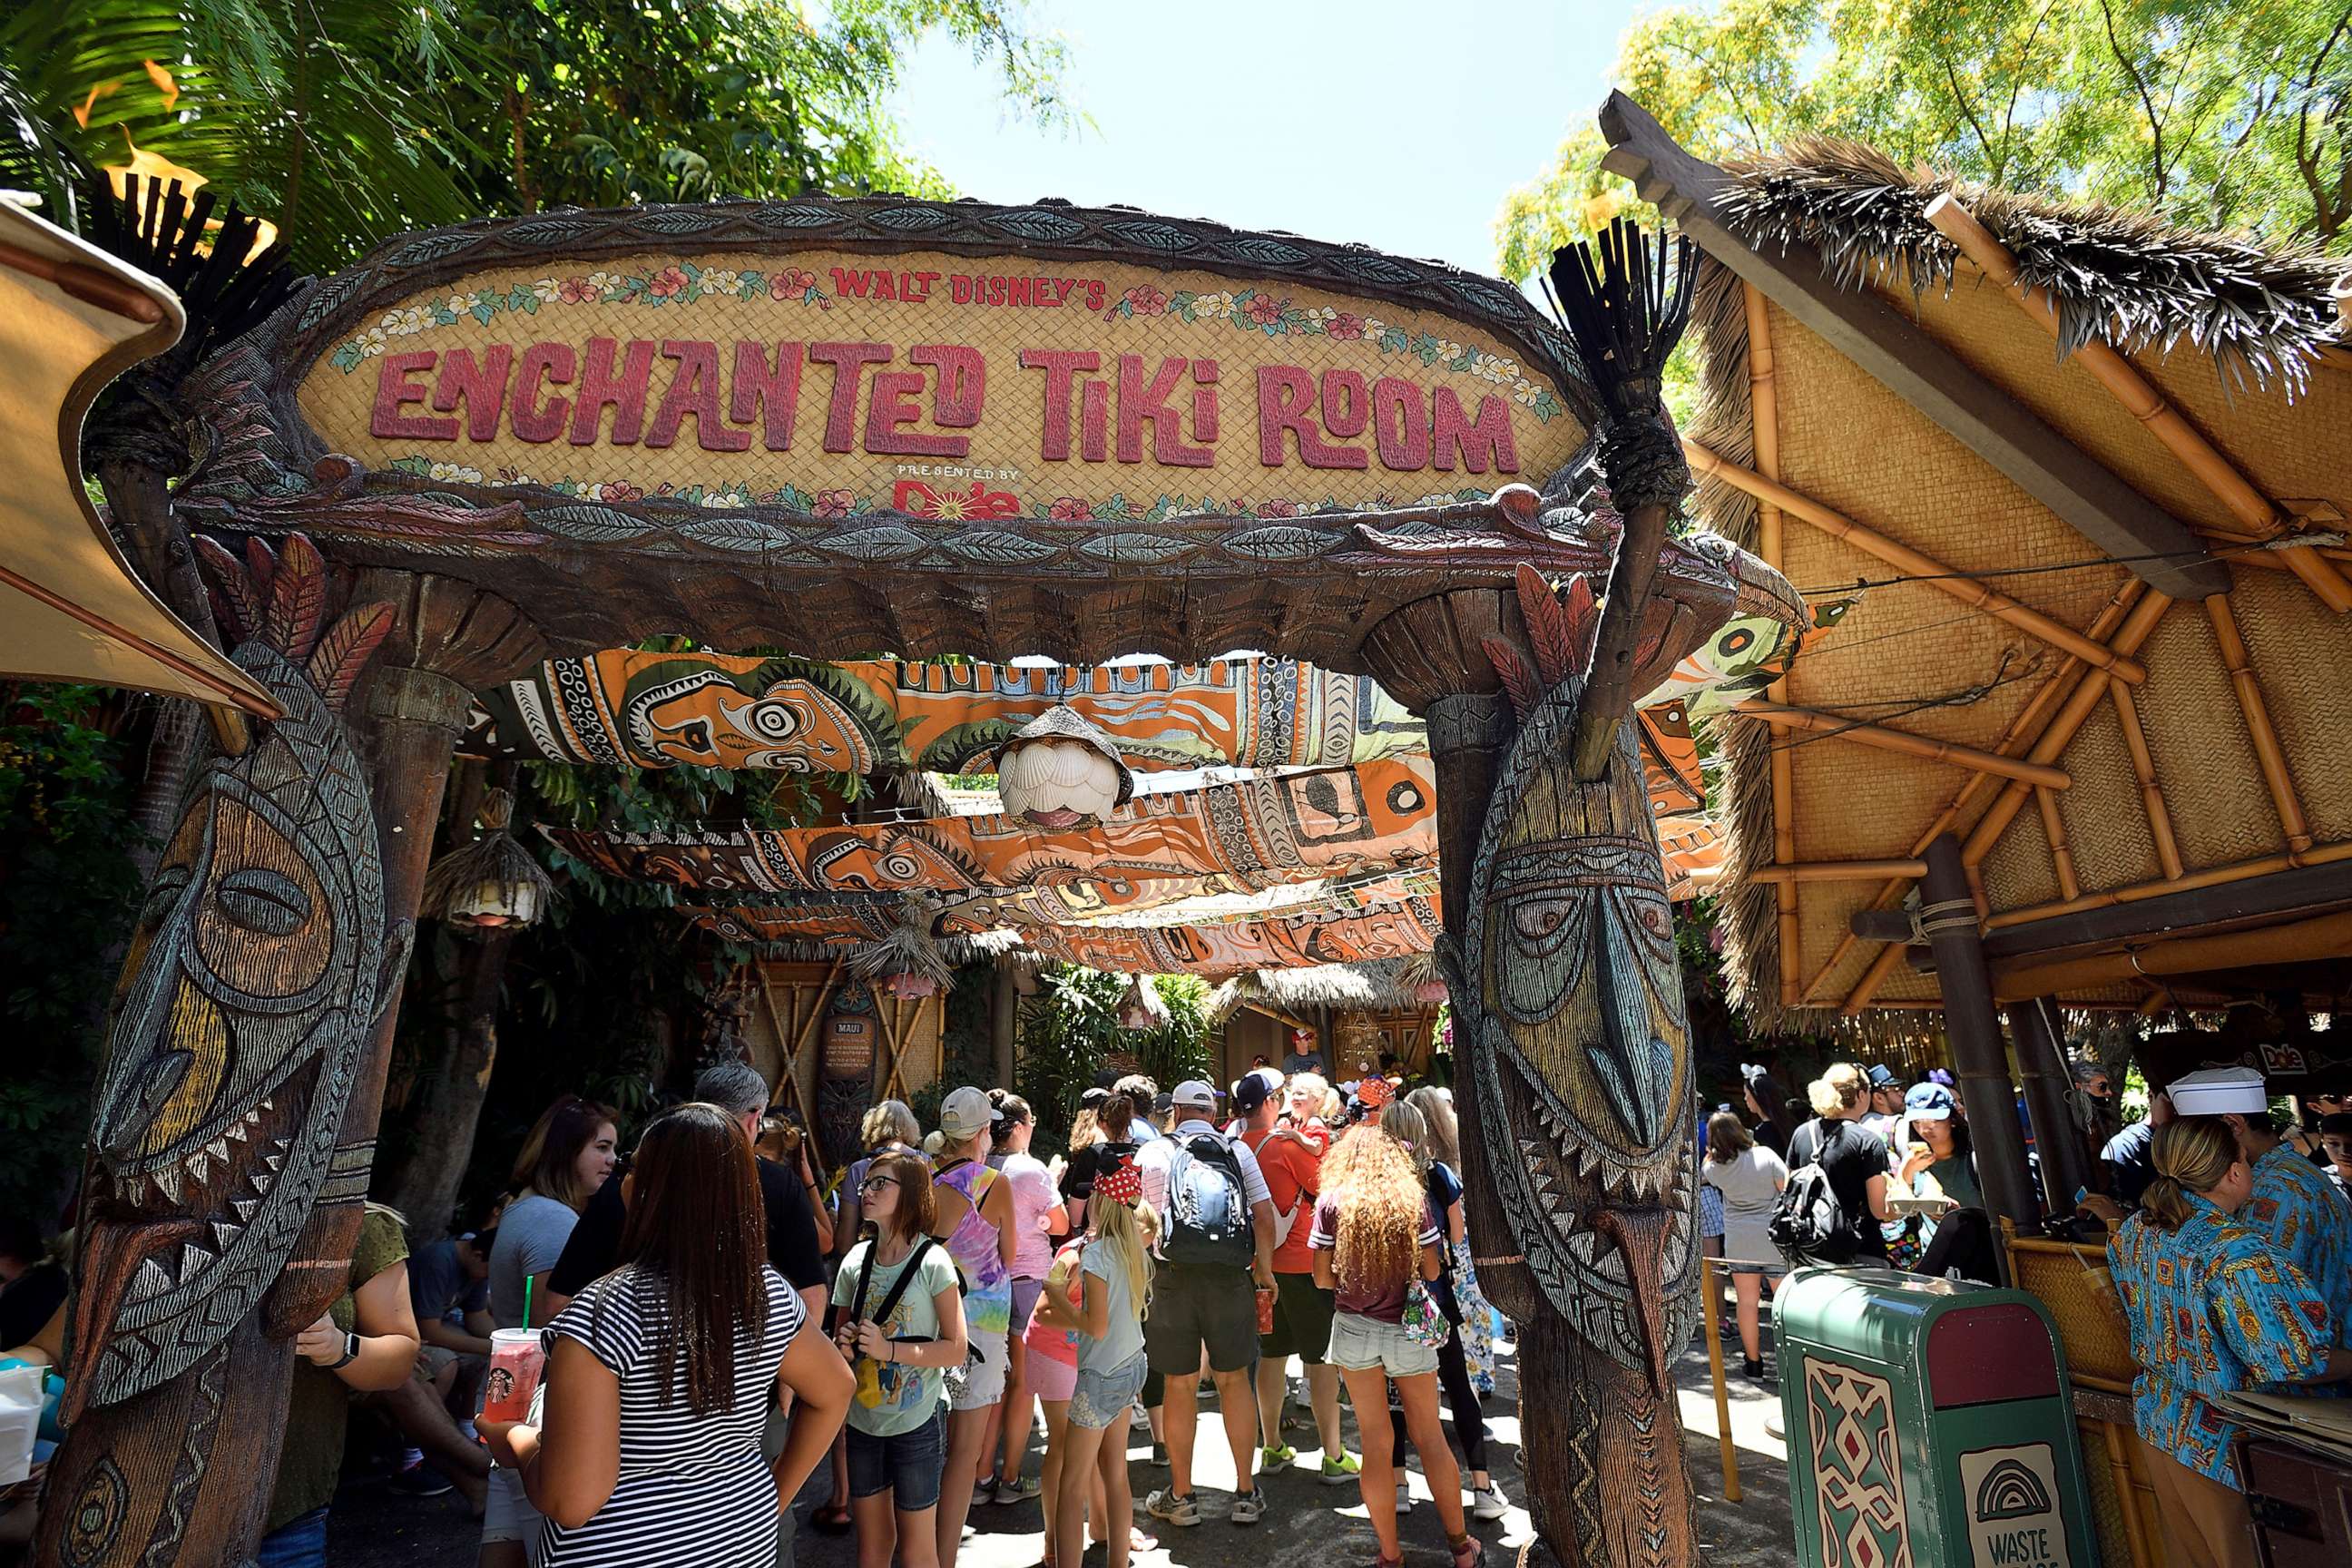 PHOTO: In this June 28, 2017, file photo, The Enchanted Tiki Room is shown in Adventureland at Disneyland in Anaheim, Calif.